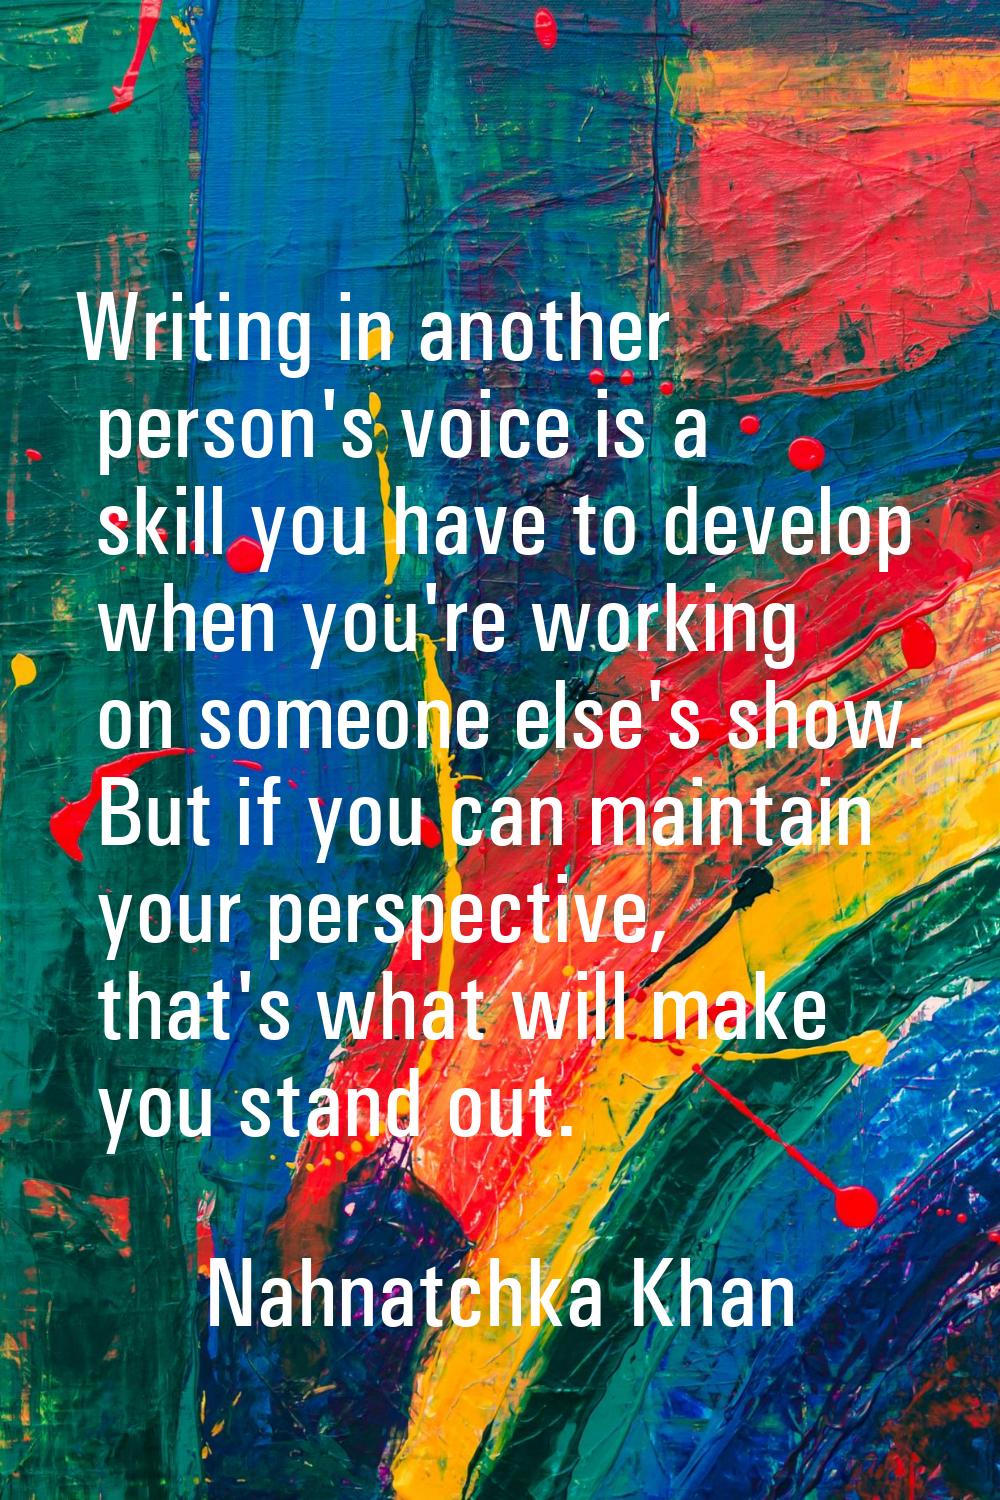 Writing in another person's voice is a skill you have to develop when you're working on someone els